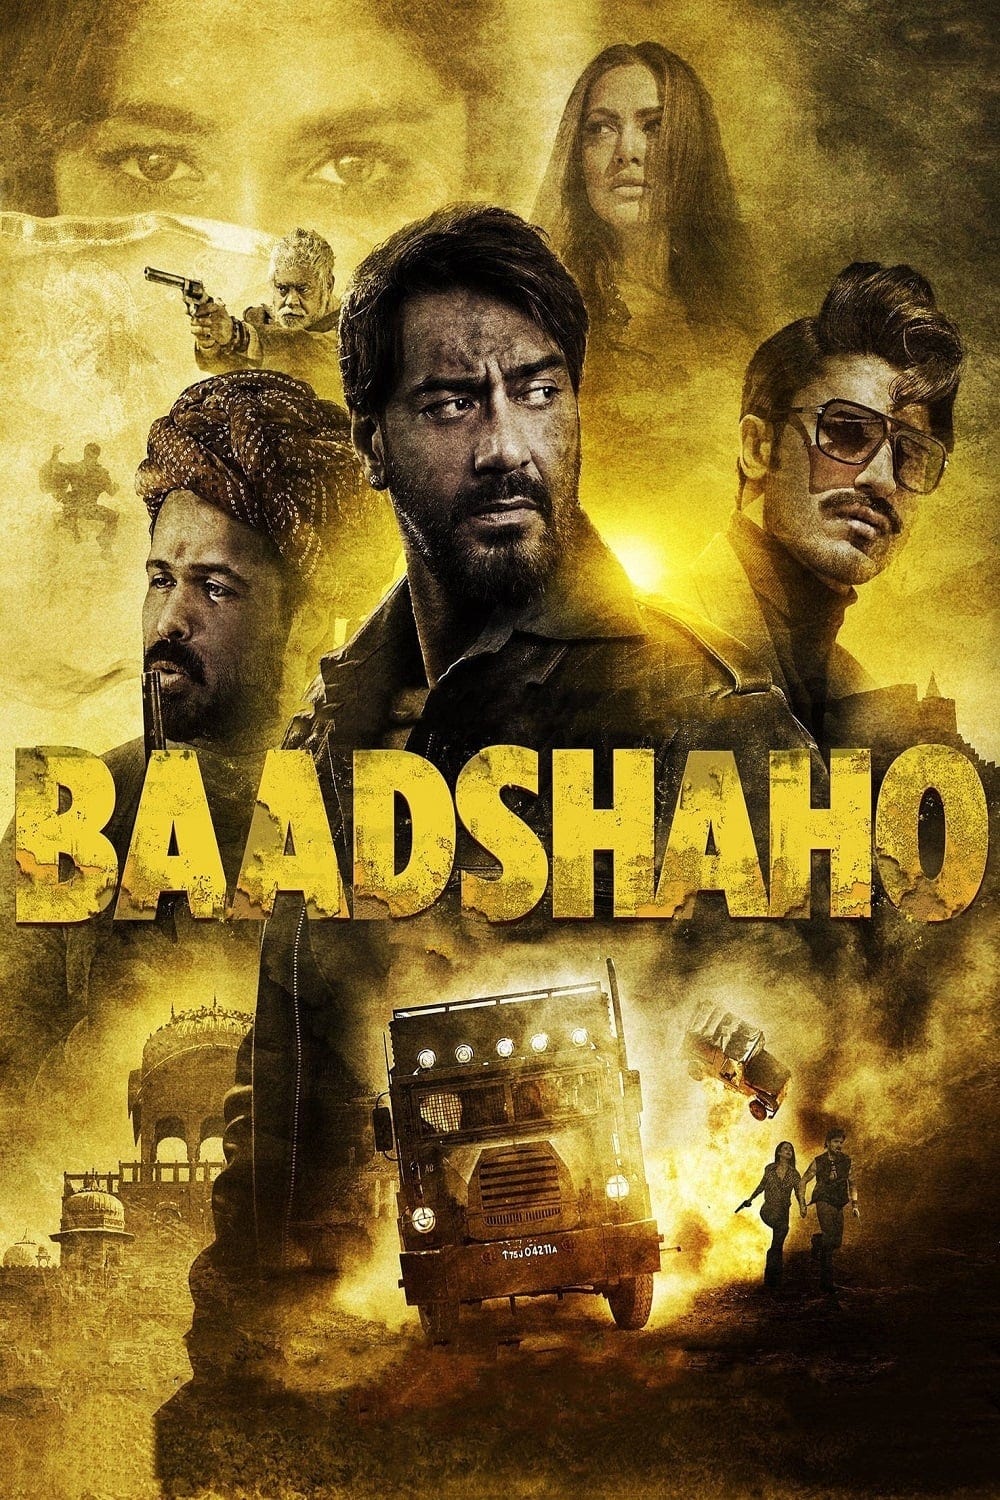 Poster for the movie "Baadshaho"